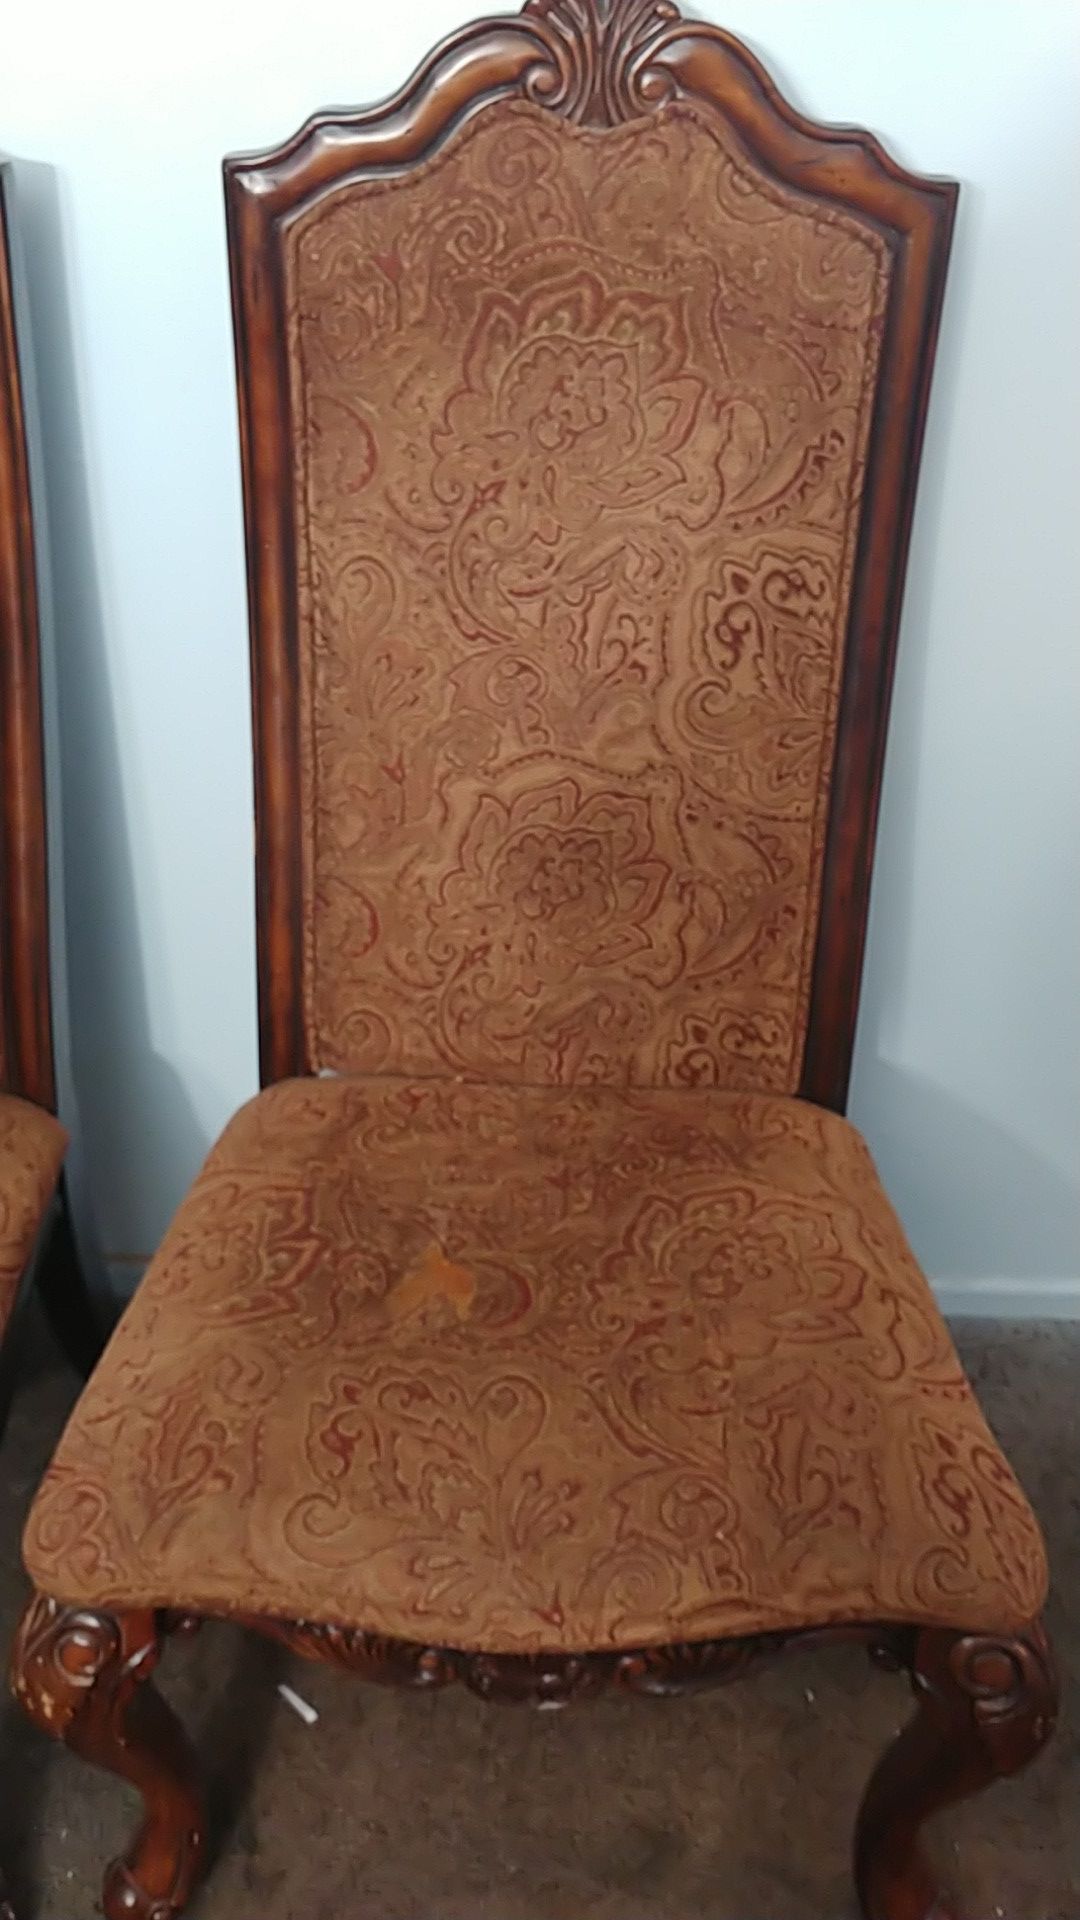 Solid wood chair s 4 of them available for $25